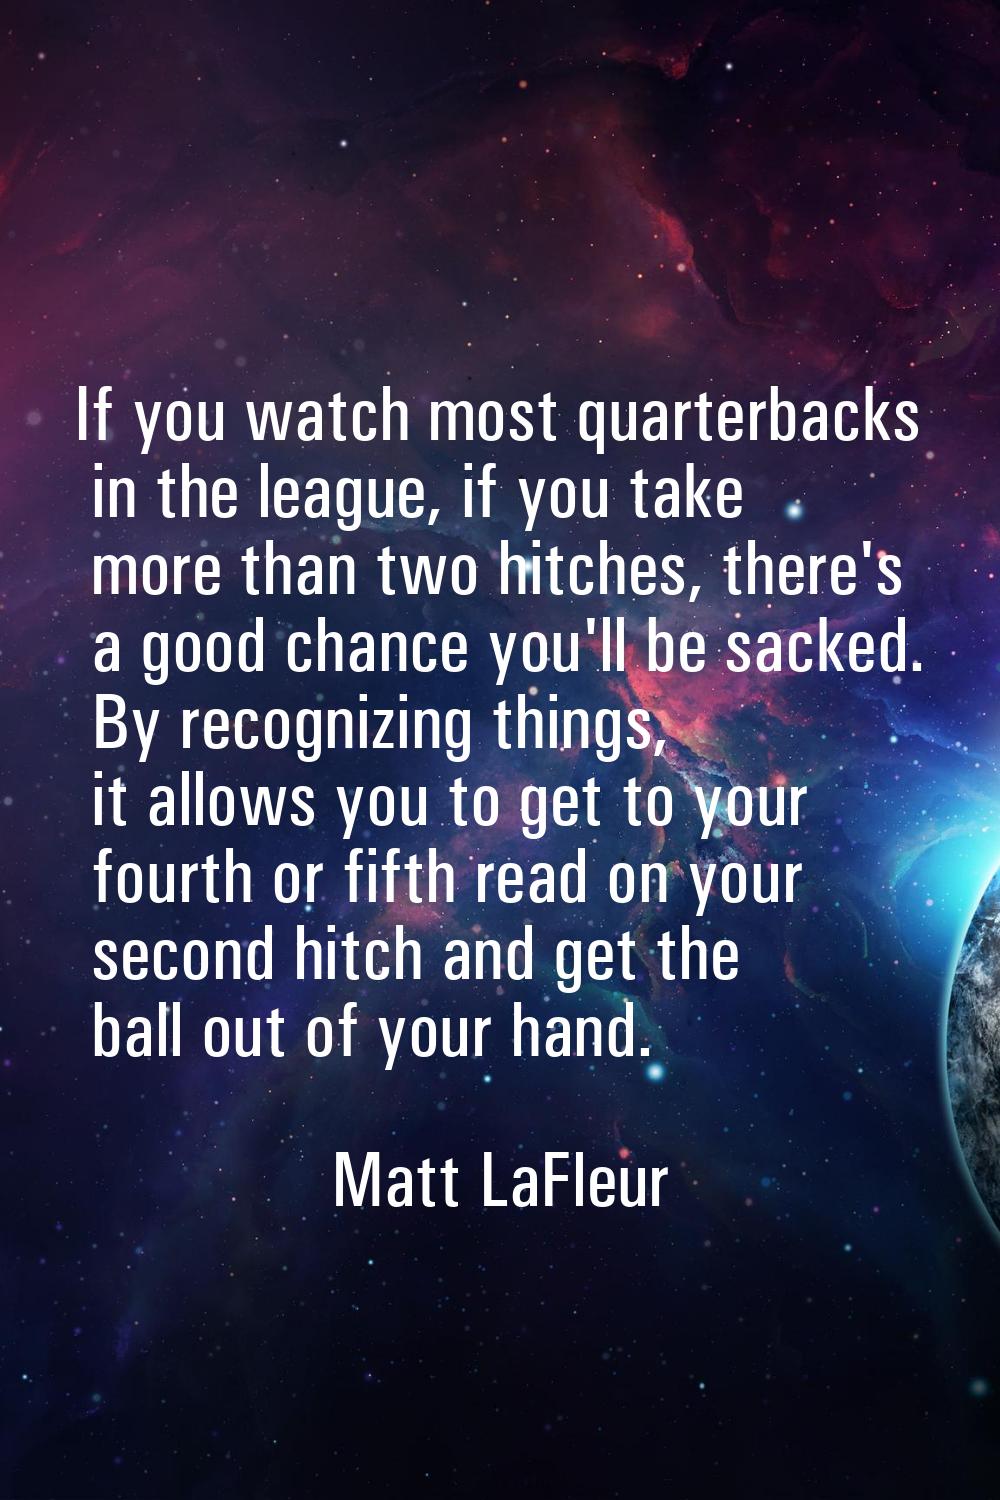 If you watch most quarterbacks in the league, if you take more than two hitches, there's a good cha